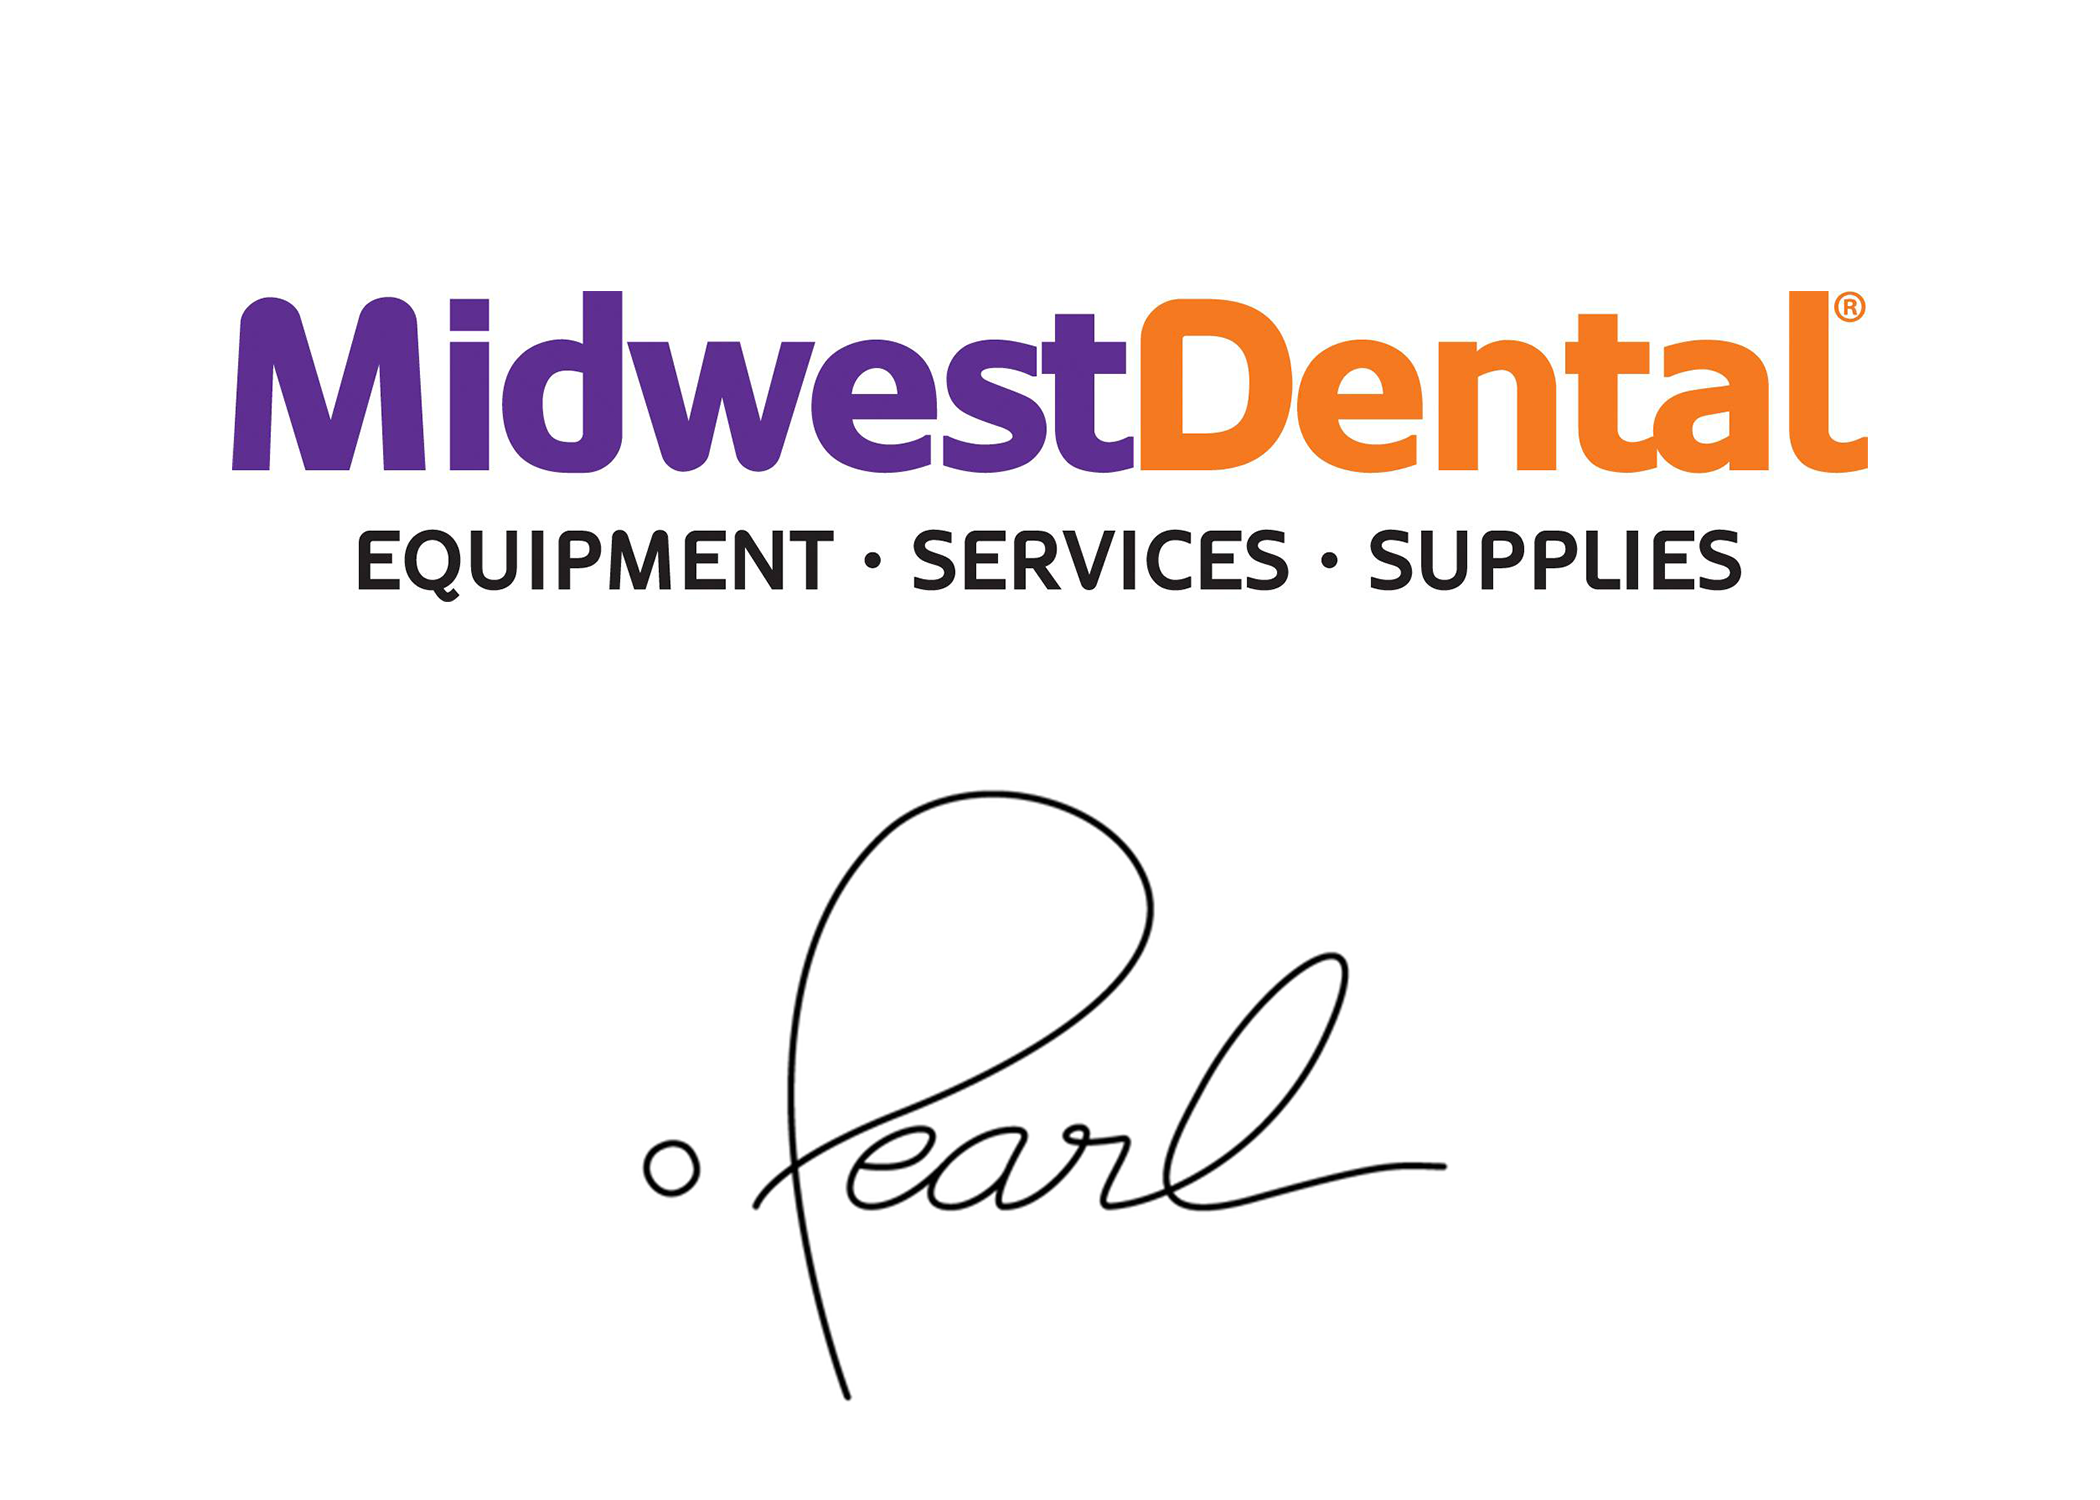 Midwest Dental Selects Pearl as Artificial Intelligence Provider. Image credit: © Midwest Dental © Pearl